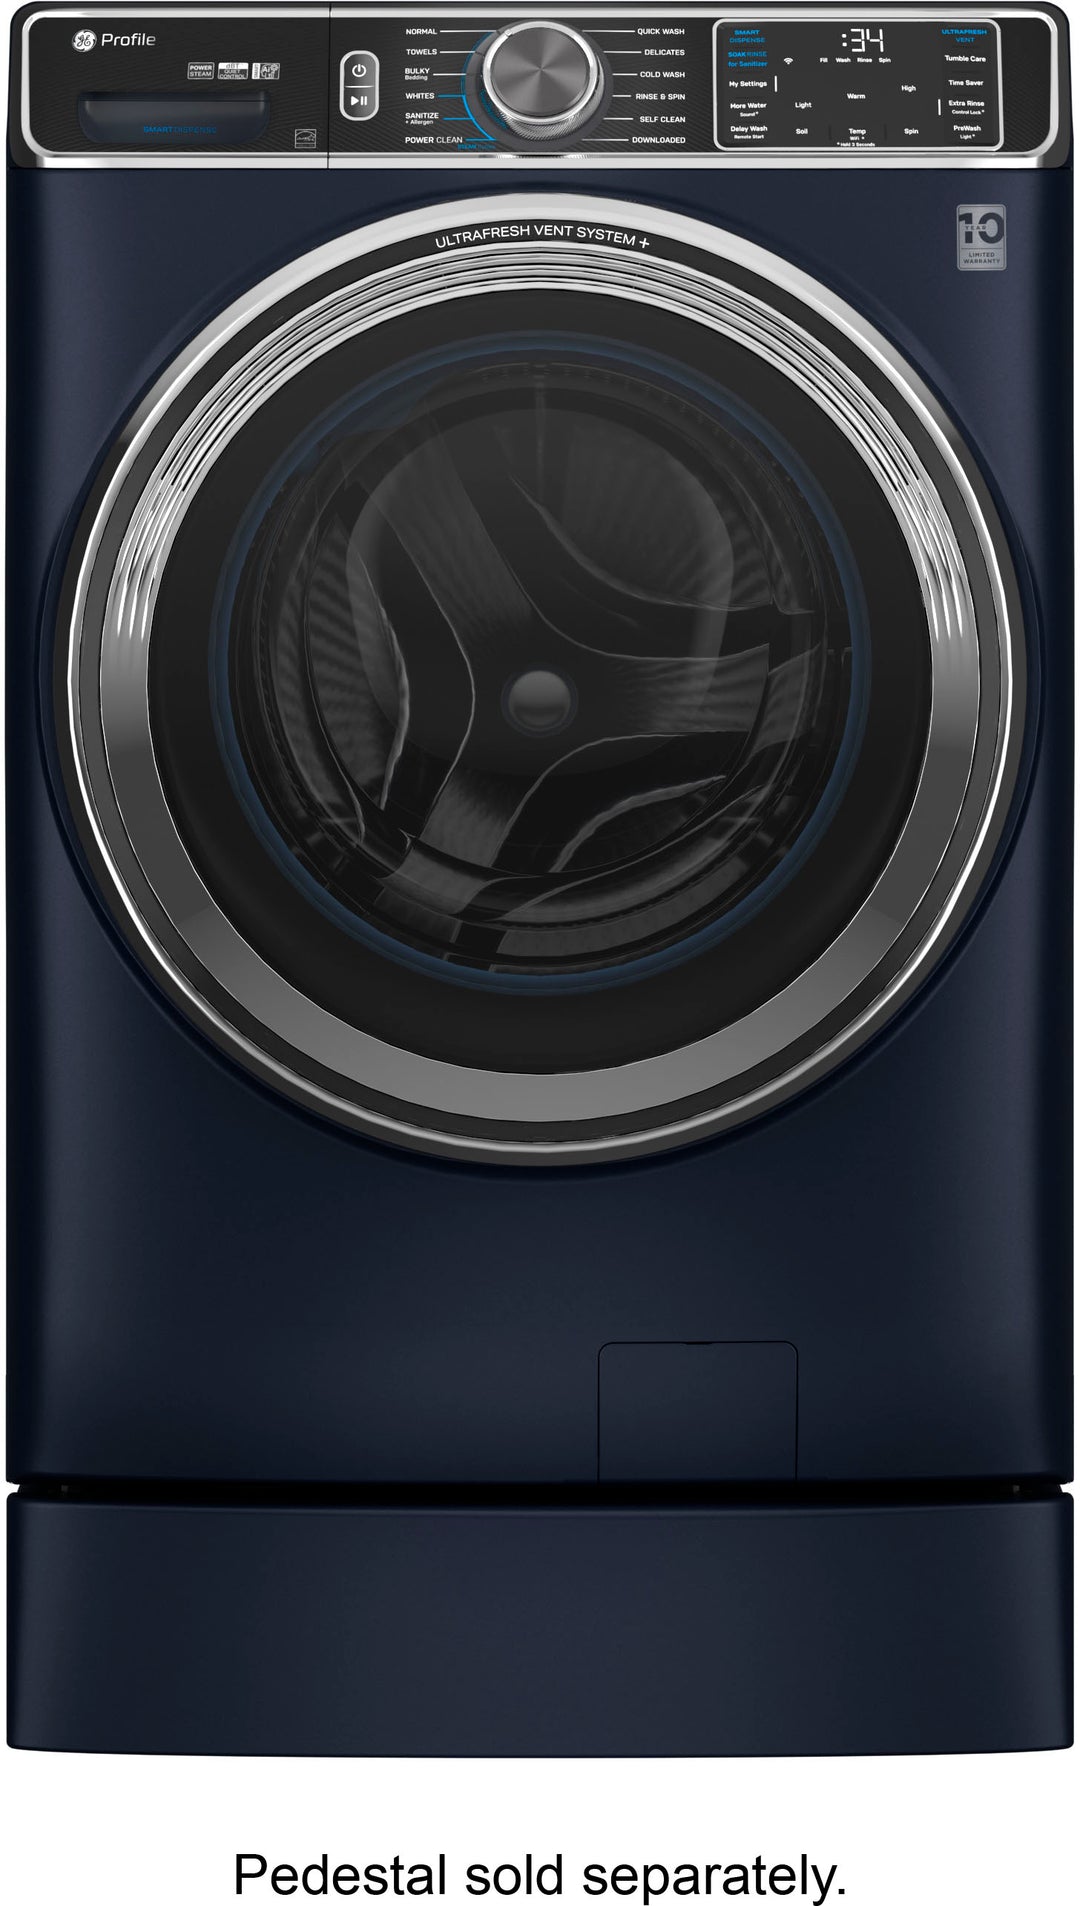 GE Profile - 5.3 Cu. Ft. Stackable Smart Front Load Washer with Steam and UltraFresh Vent System+ With OdorBlock - Saphire Blue_10